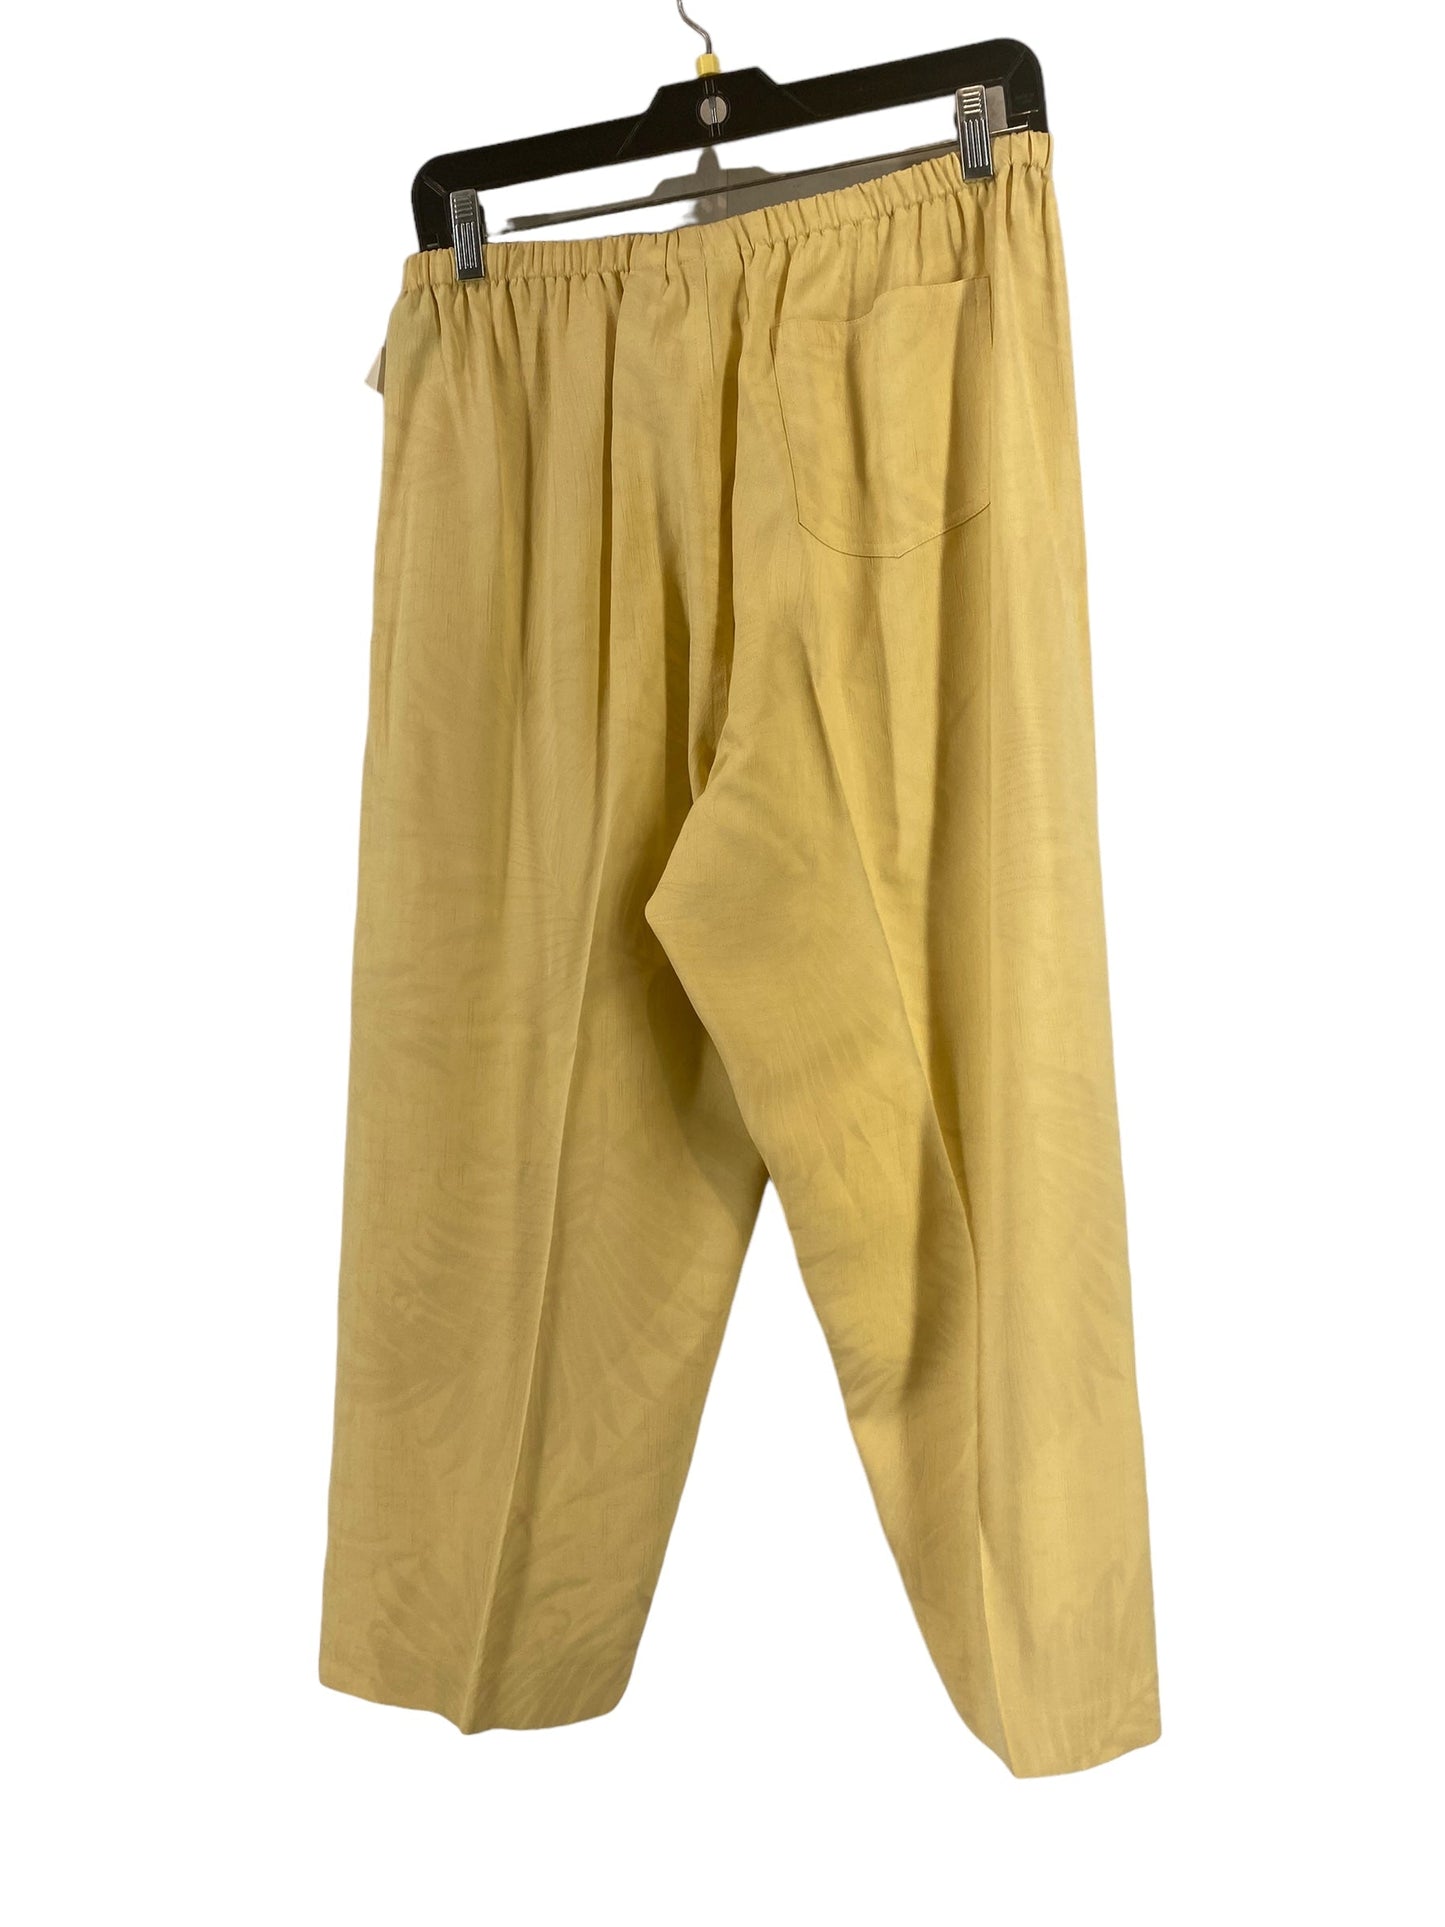 Yellow Pants Linen Chicos, Size 2